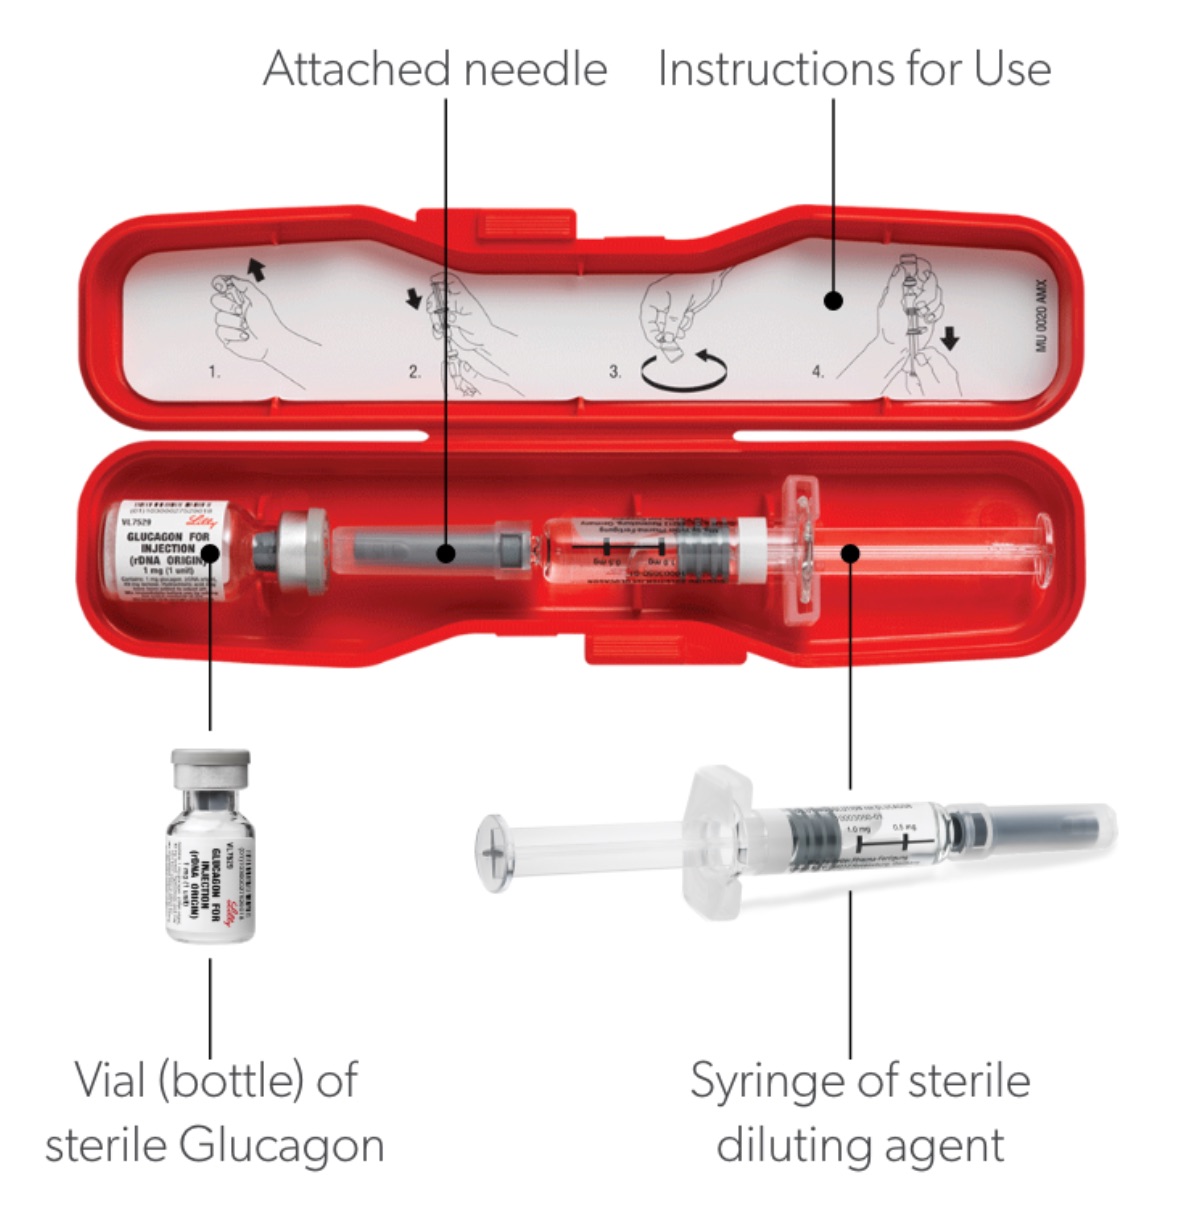 a glucagon kit includes a syringe and vial